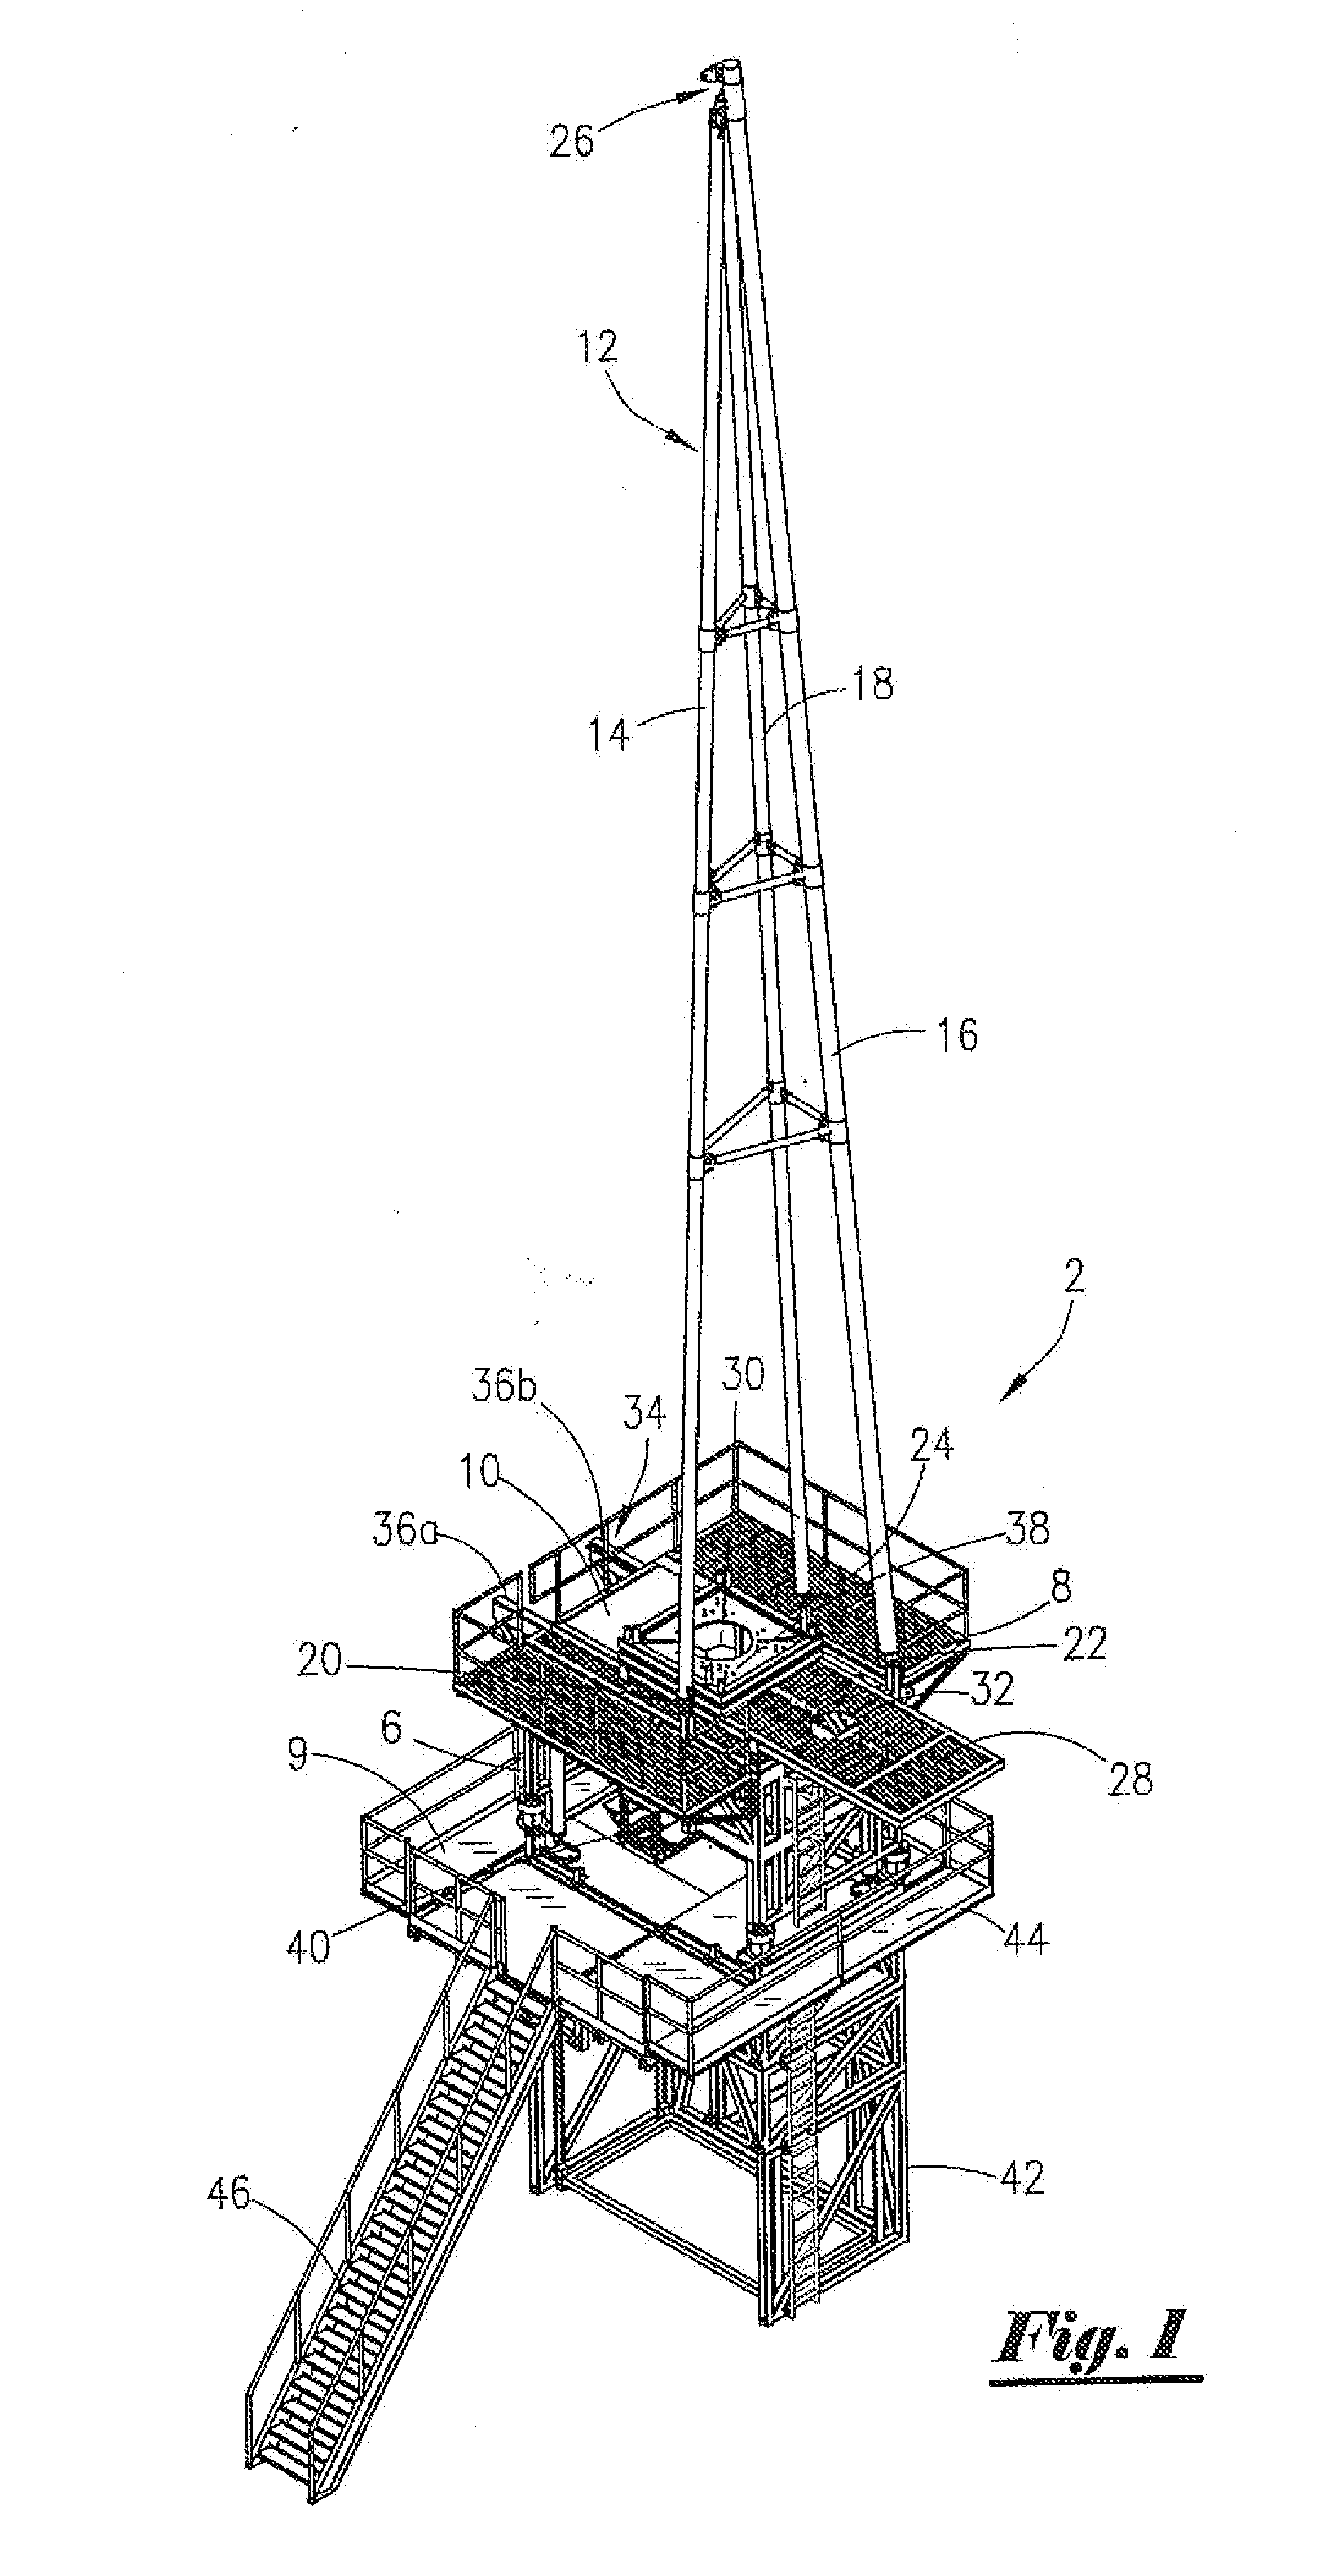 Coiled Tubing Well Intervention System and Method